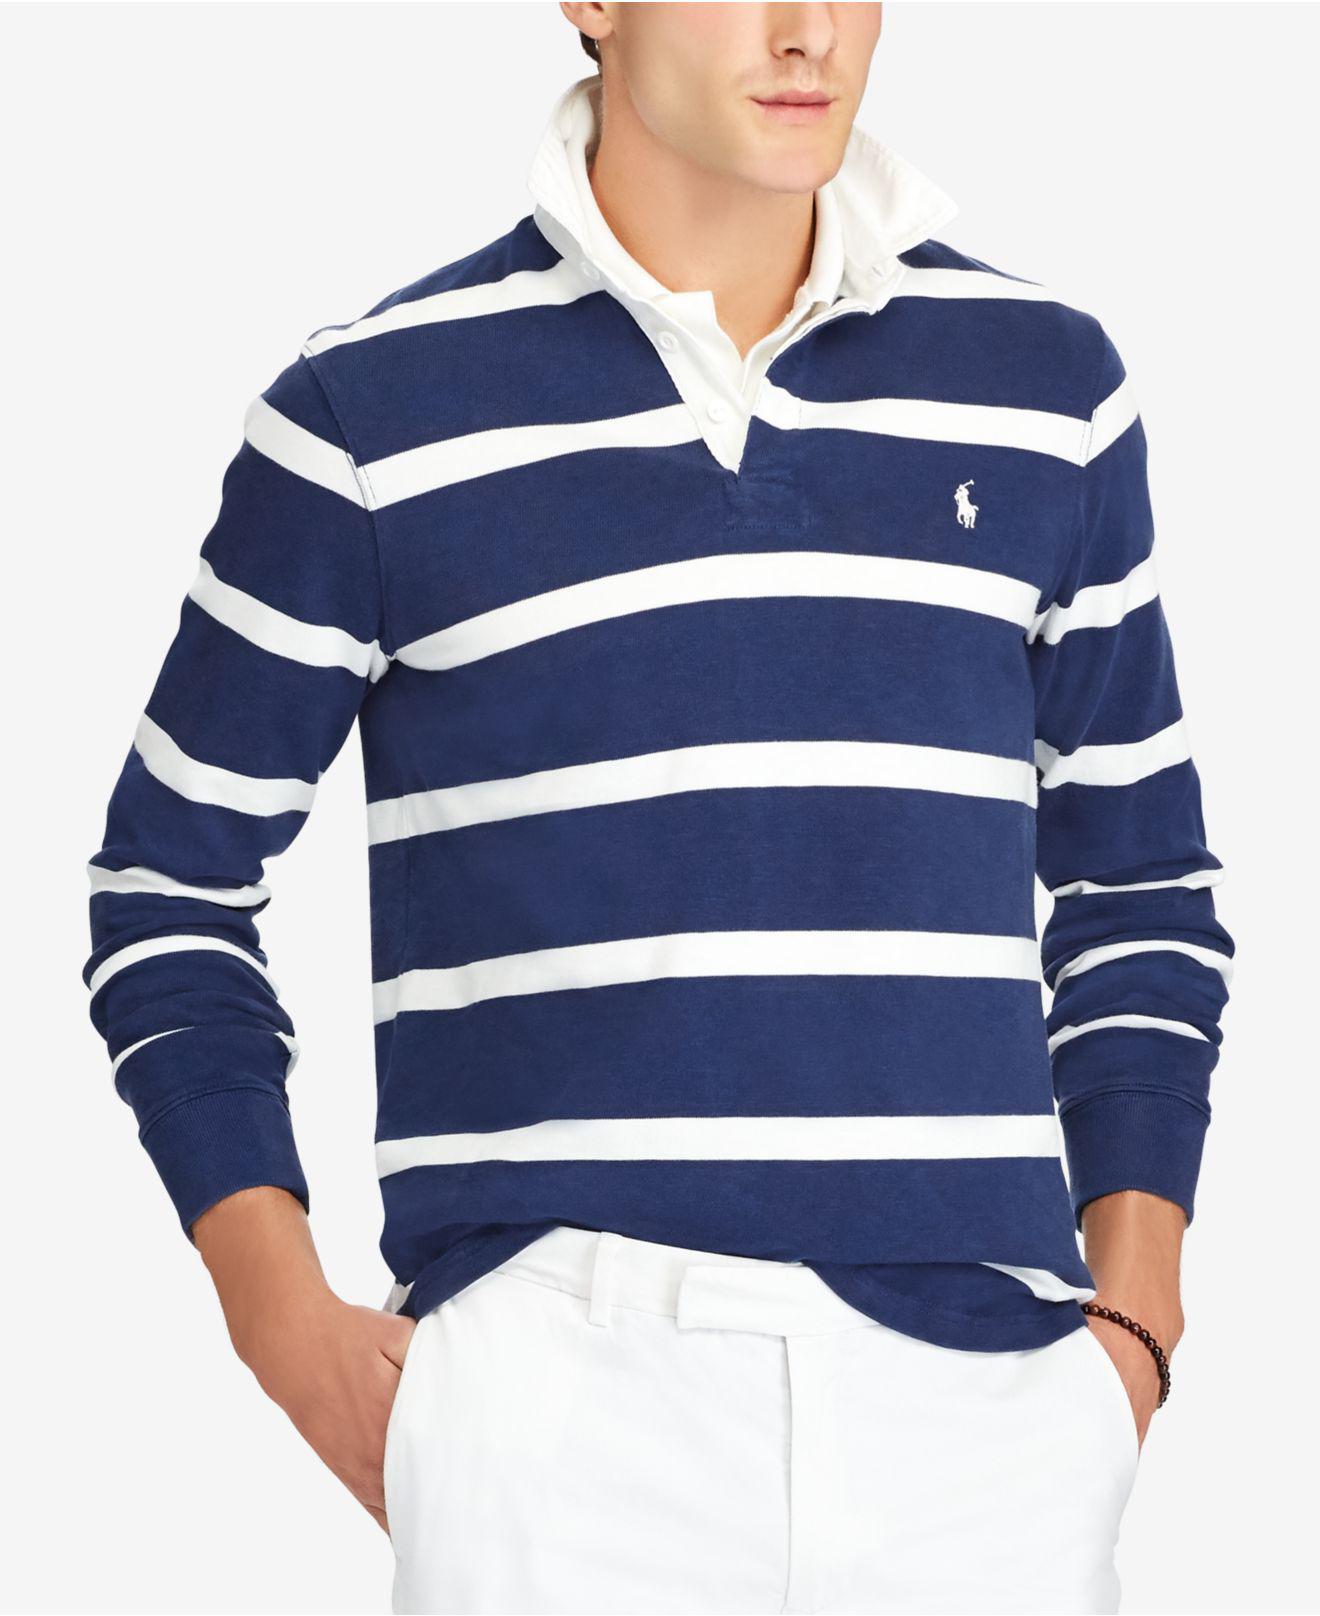  Polo  Ralph  Lauren  Rubber Iconic Stripped Rugby  Shirt  in 